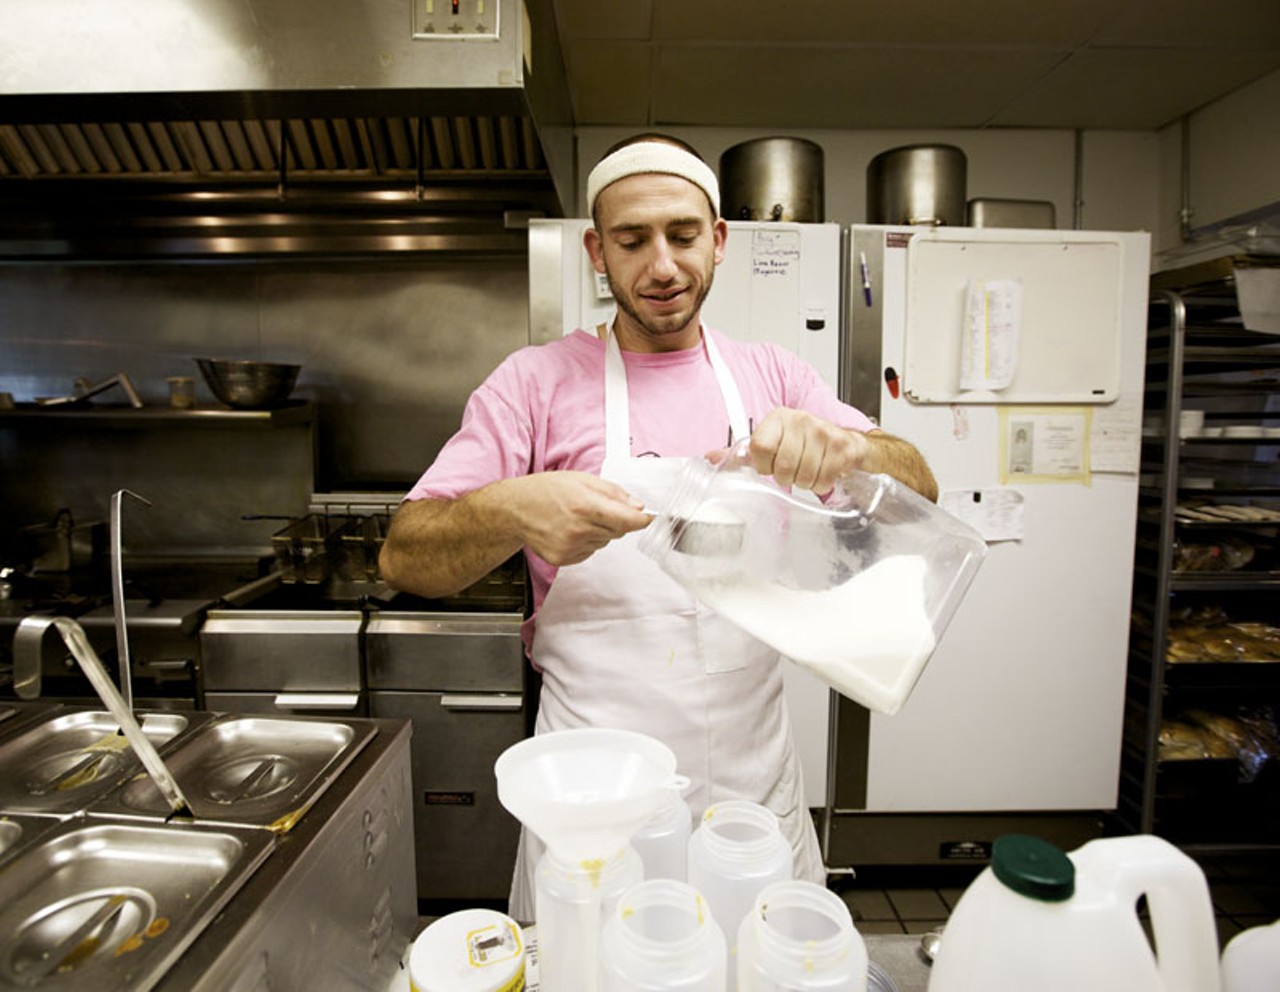 Mike Clodfelder, a cook at the Piccadilly, in the kitchen.